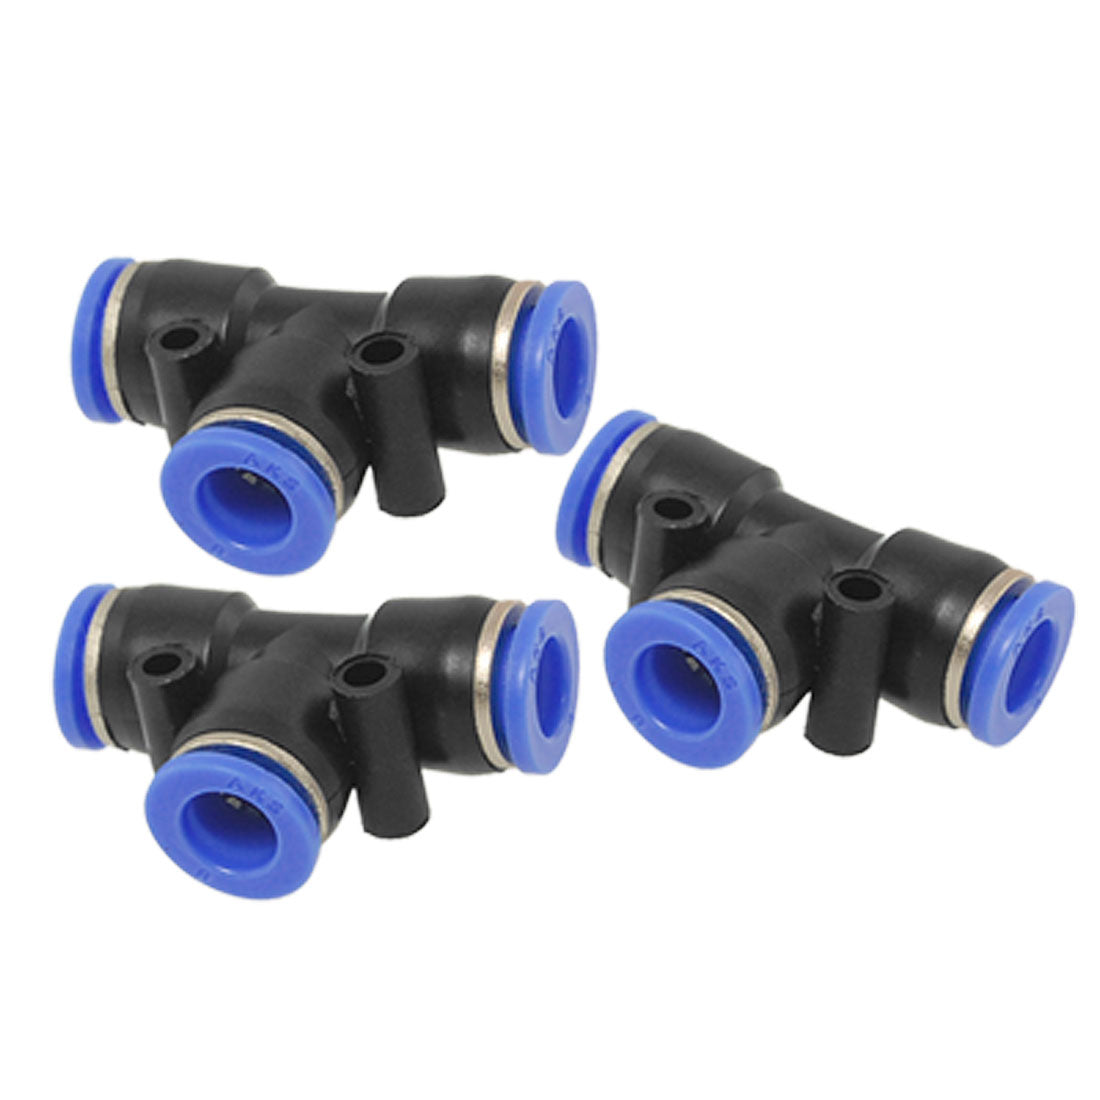 uxcell Uxcell 3 Pcs 8mm Pneumatic Air Piping Connection Quick Fittings